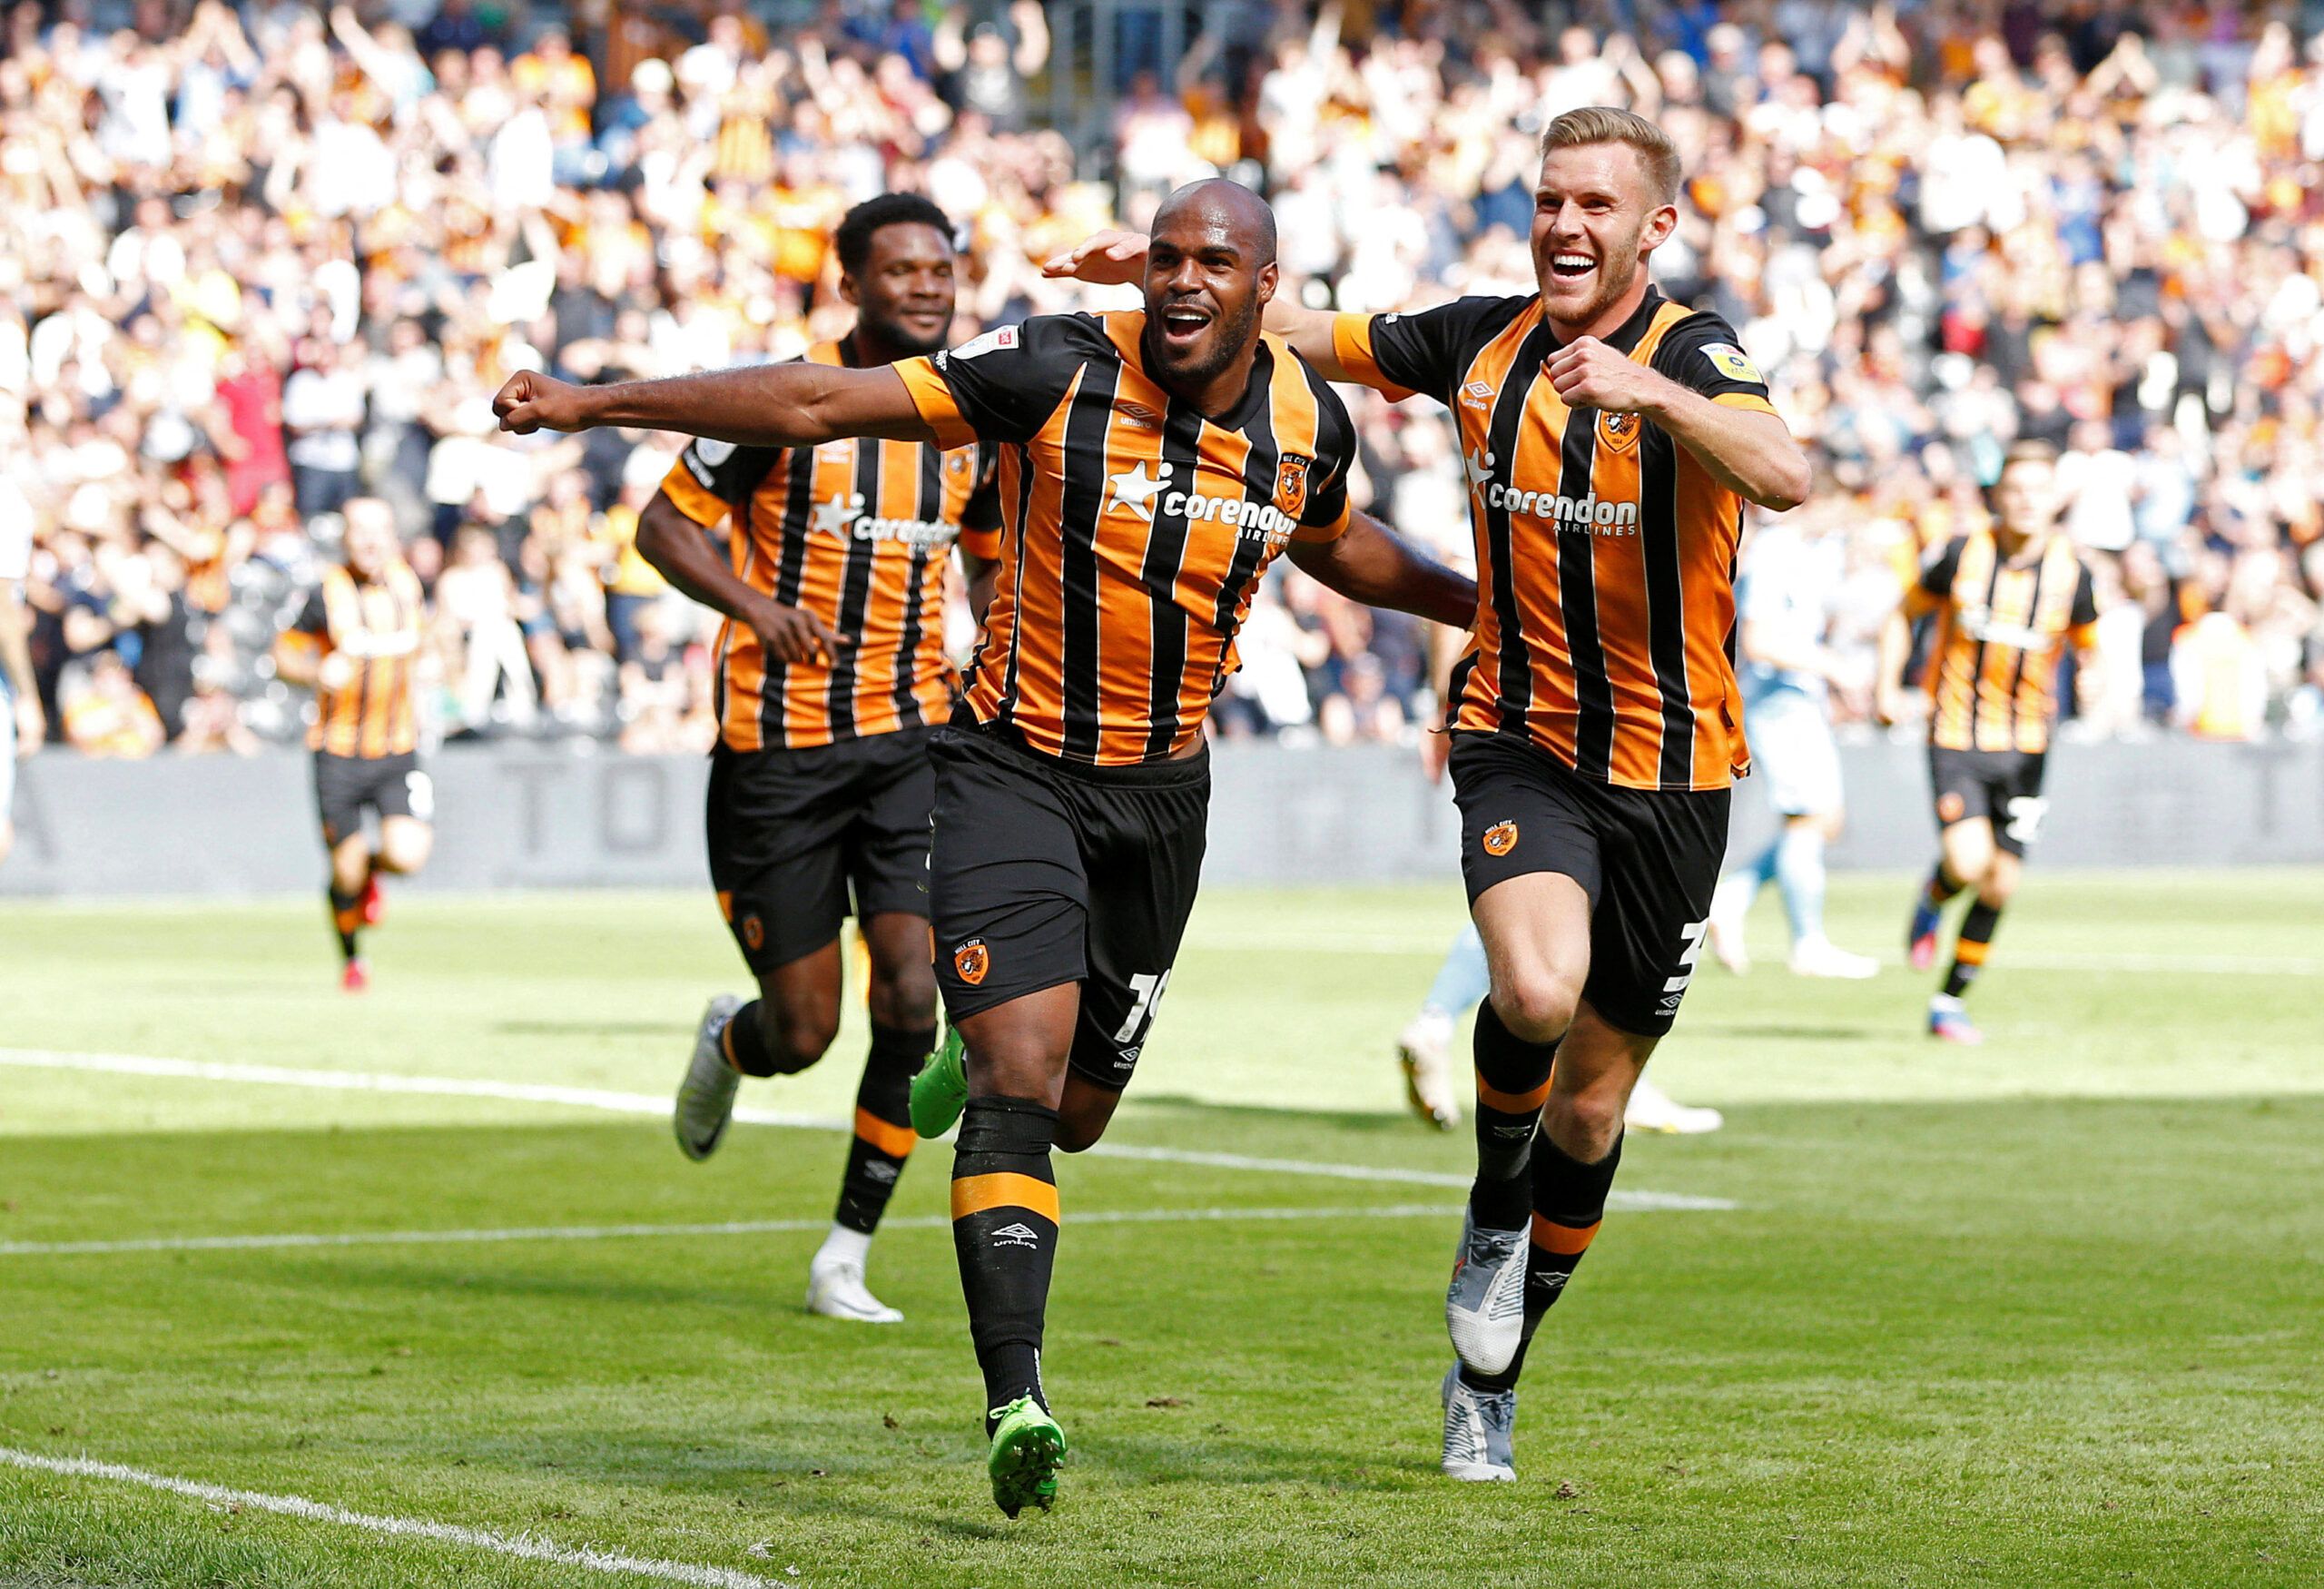 Soccer Football - Championship - Hull City v Coventry City - MKM Stadium, Hull, Britain - August 27, 2022 Hull City's Oscar Estupinan celebrates scoring their first goal with teammates Action Images/Ed Sykes EDITORIAL USE ONLY. No use with unauthorized audio, video, data, fixture lists, club/league logos or 